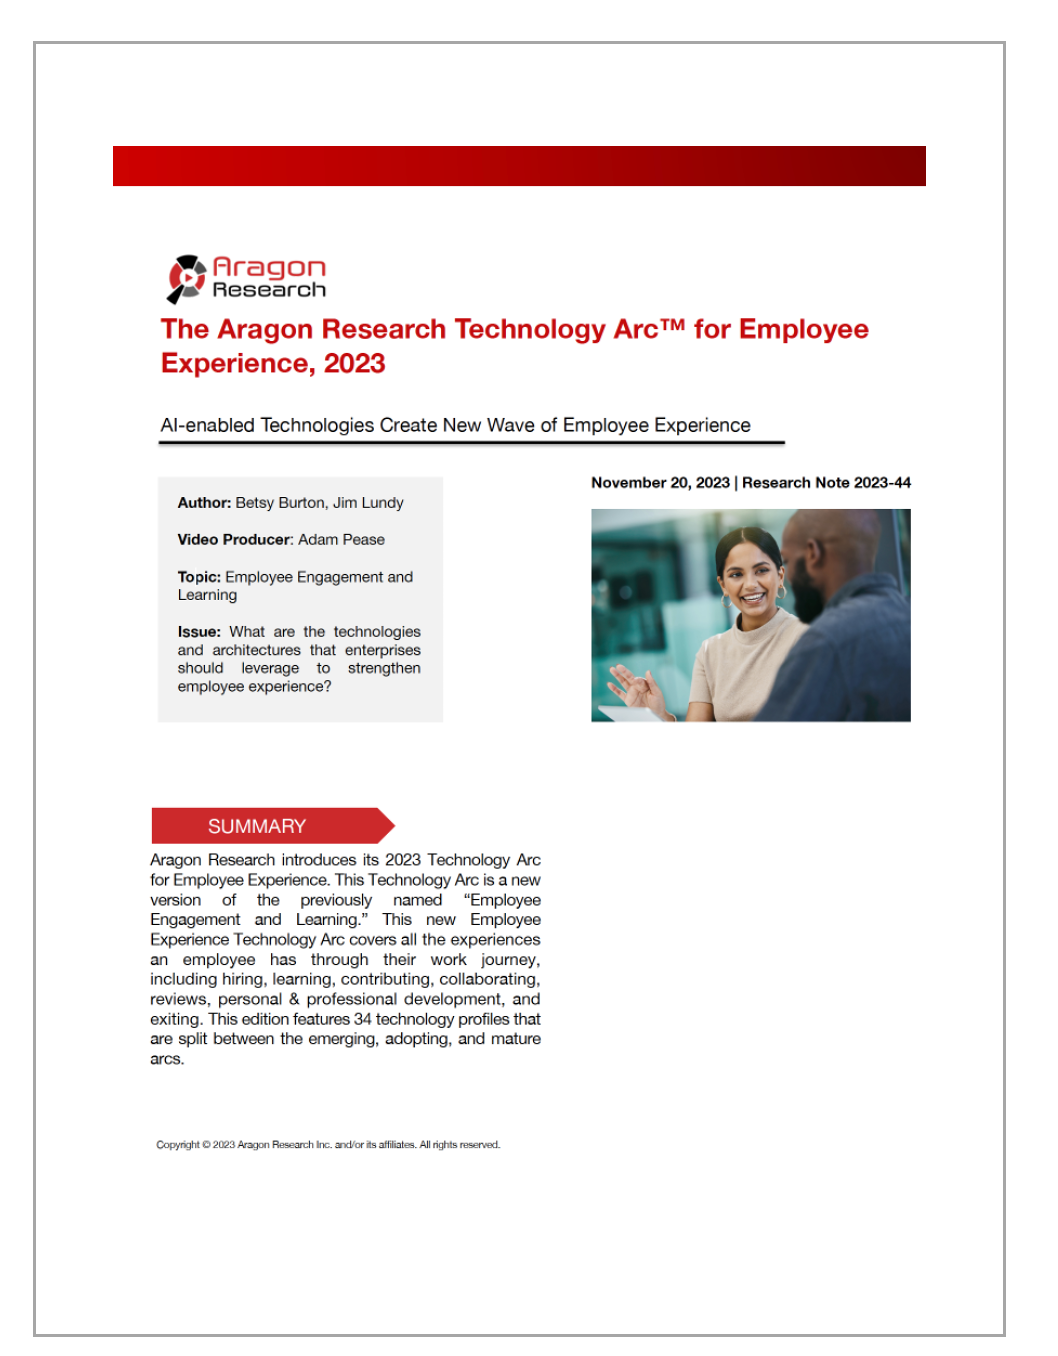 2023-44 Aragon Research Technology Arc for Employee Engagement, 2023